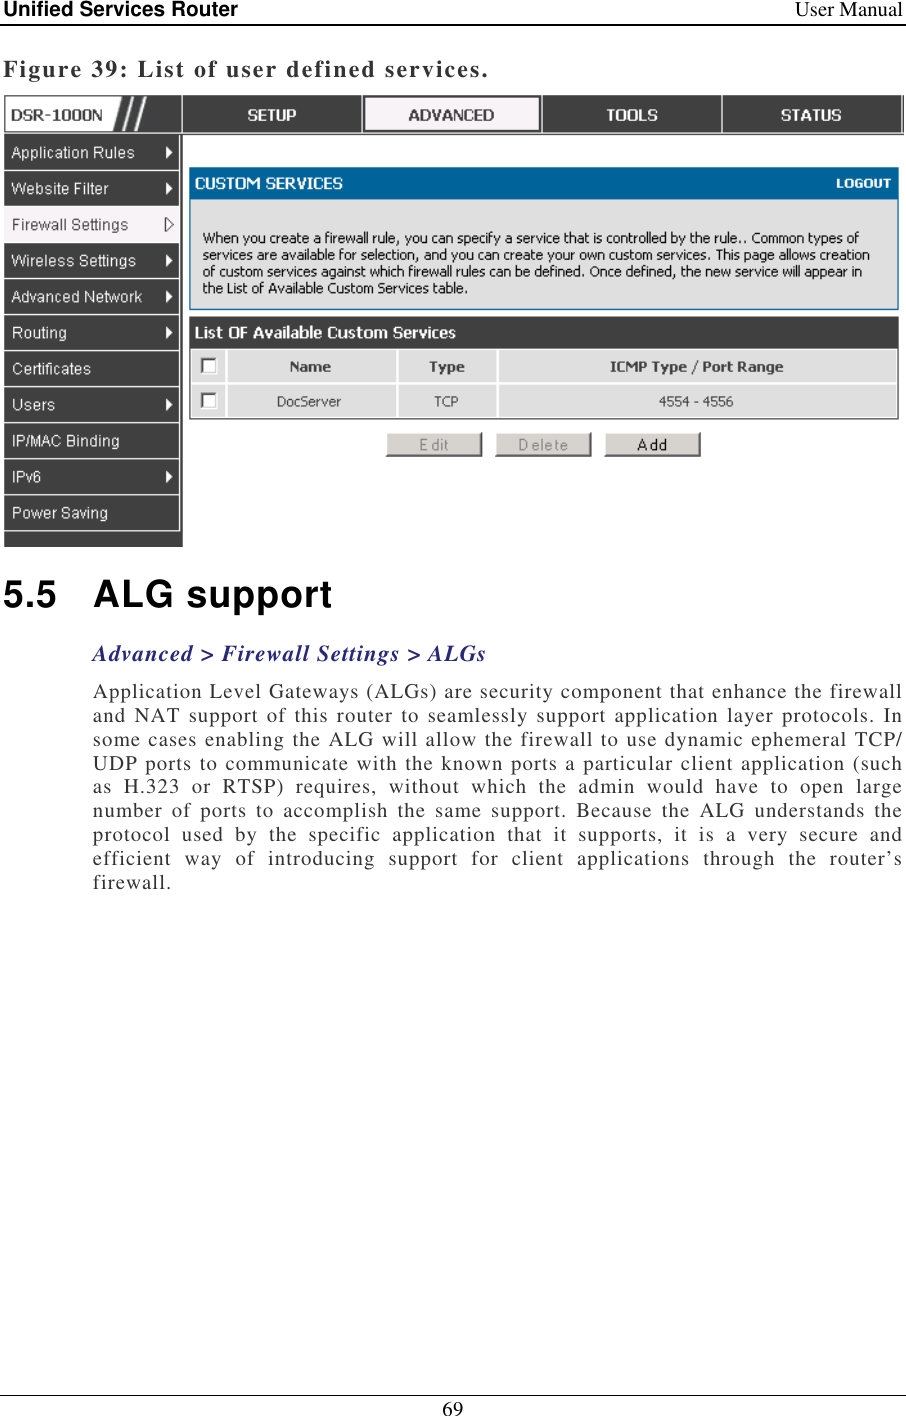 Unified Services Router    User Manual 69  Figure 39: List of user defined services.  5.5  ALG support Advanced &gt; Firewall Settings &gt; ALGs Application Level Gateways (ALGs) are security component that enhance the firewall and  NAT  support of this  router  to  seamlessly support application layer protocols.  In some cases enabling the ALG will allow the firewall to use dynamic ephemeral TCP/ UDP ports to communicate with the known ports a particular client application (such as  H.323  or  RTSP)  requires,  without  which  the  admin  would  have  to  open  large number  of  ports  to  accomplish  the  same  support.  Because  the  ALG  understands  the protocol  used  by  the  specific  application  that  it  supports,  it  is  a  very  secure  and efficient  way  of  introducing  support  for  client  applications  through  the  router’s firewall.  